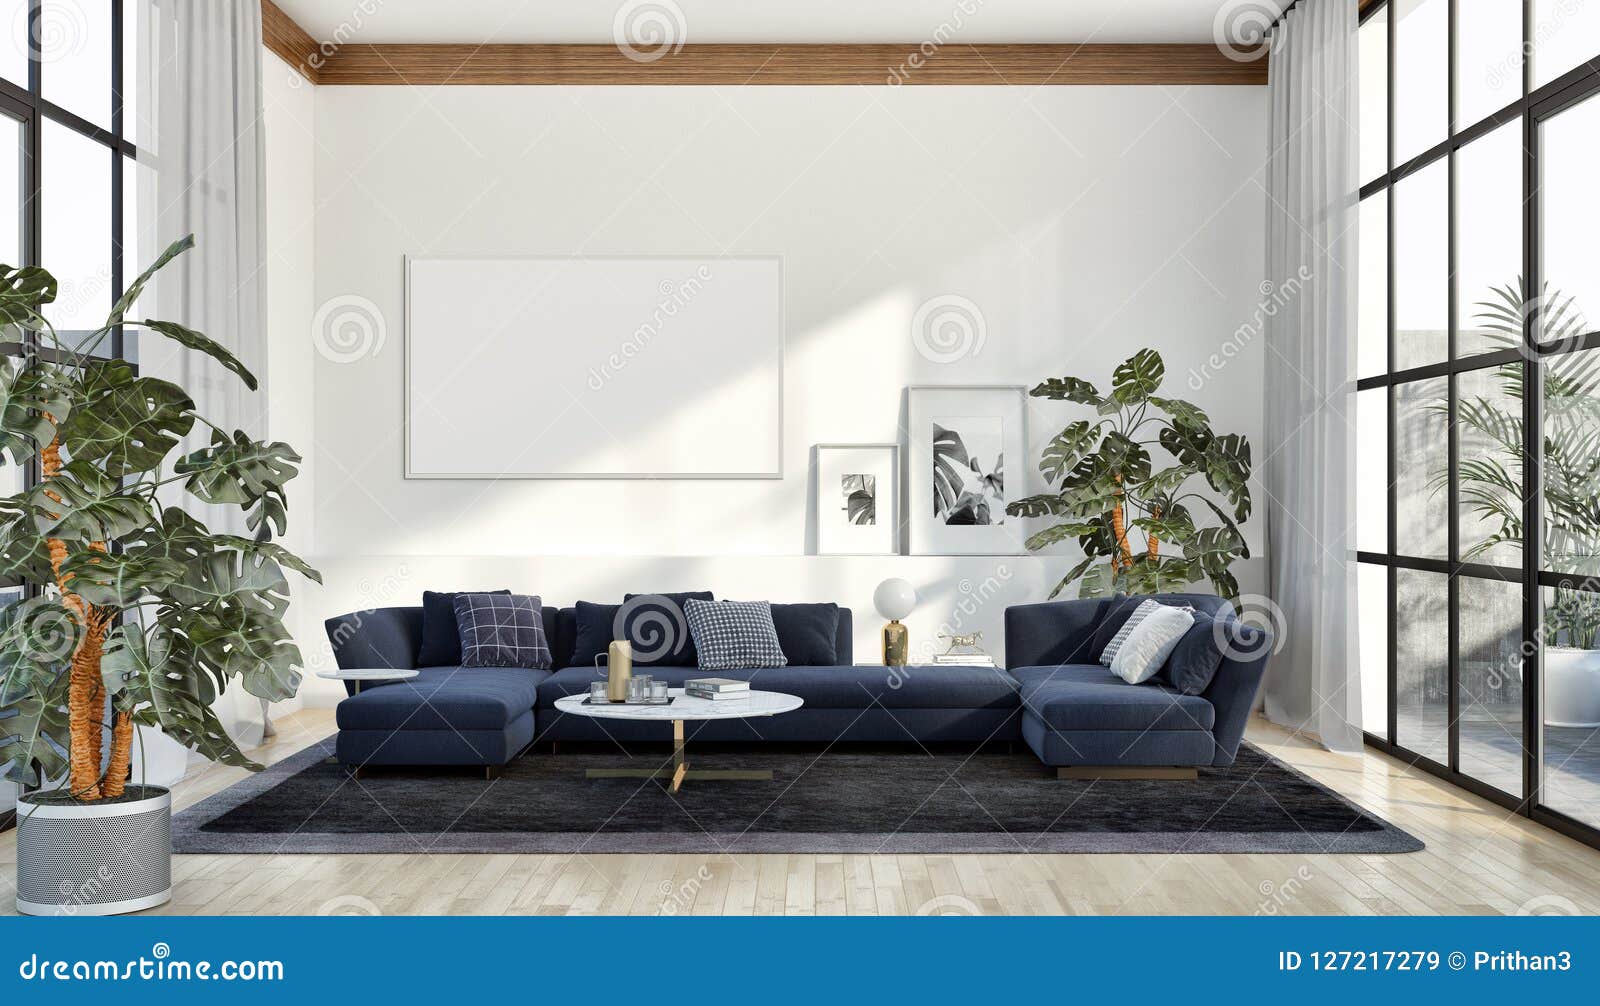 modern bright interiors apartment with mock up poster frame  3d rendering computer generated image